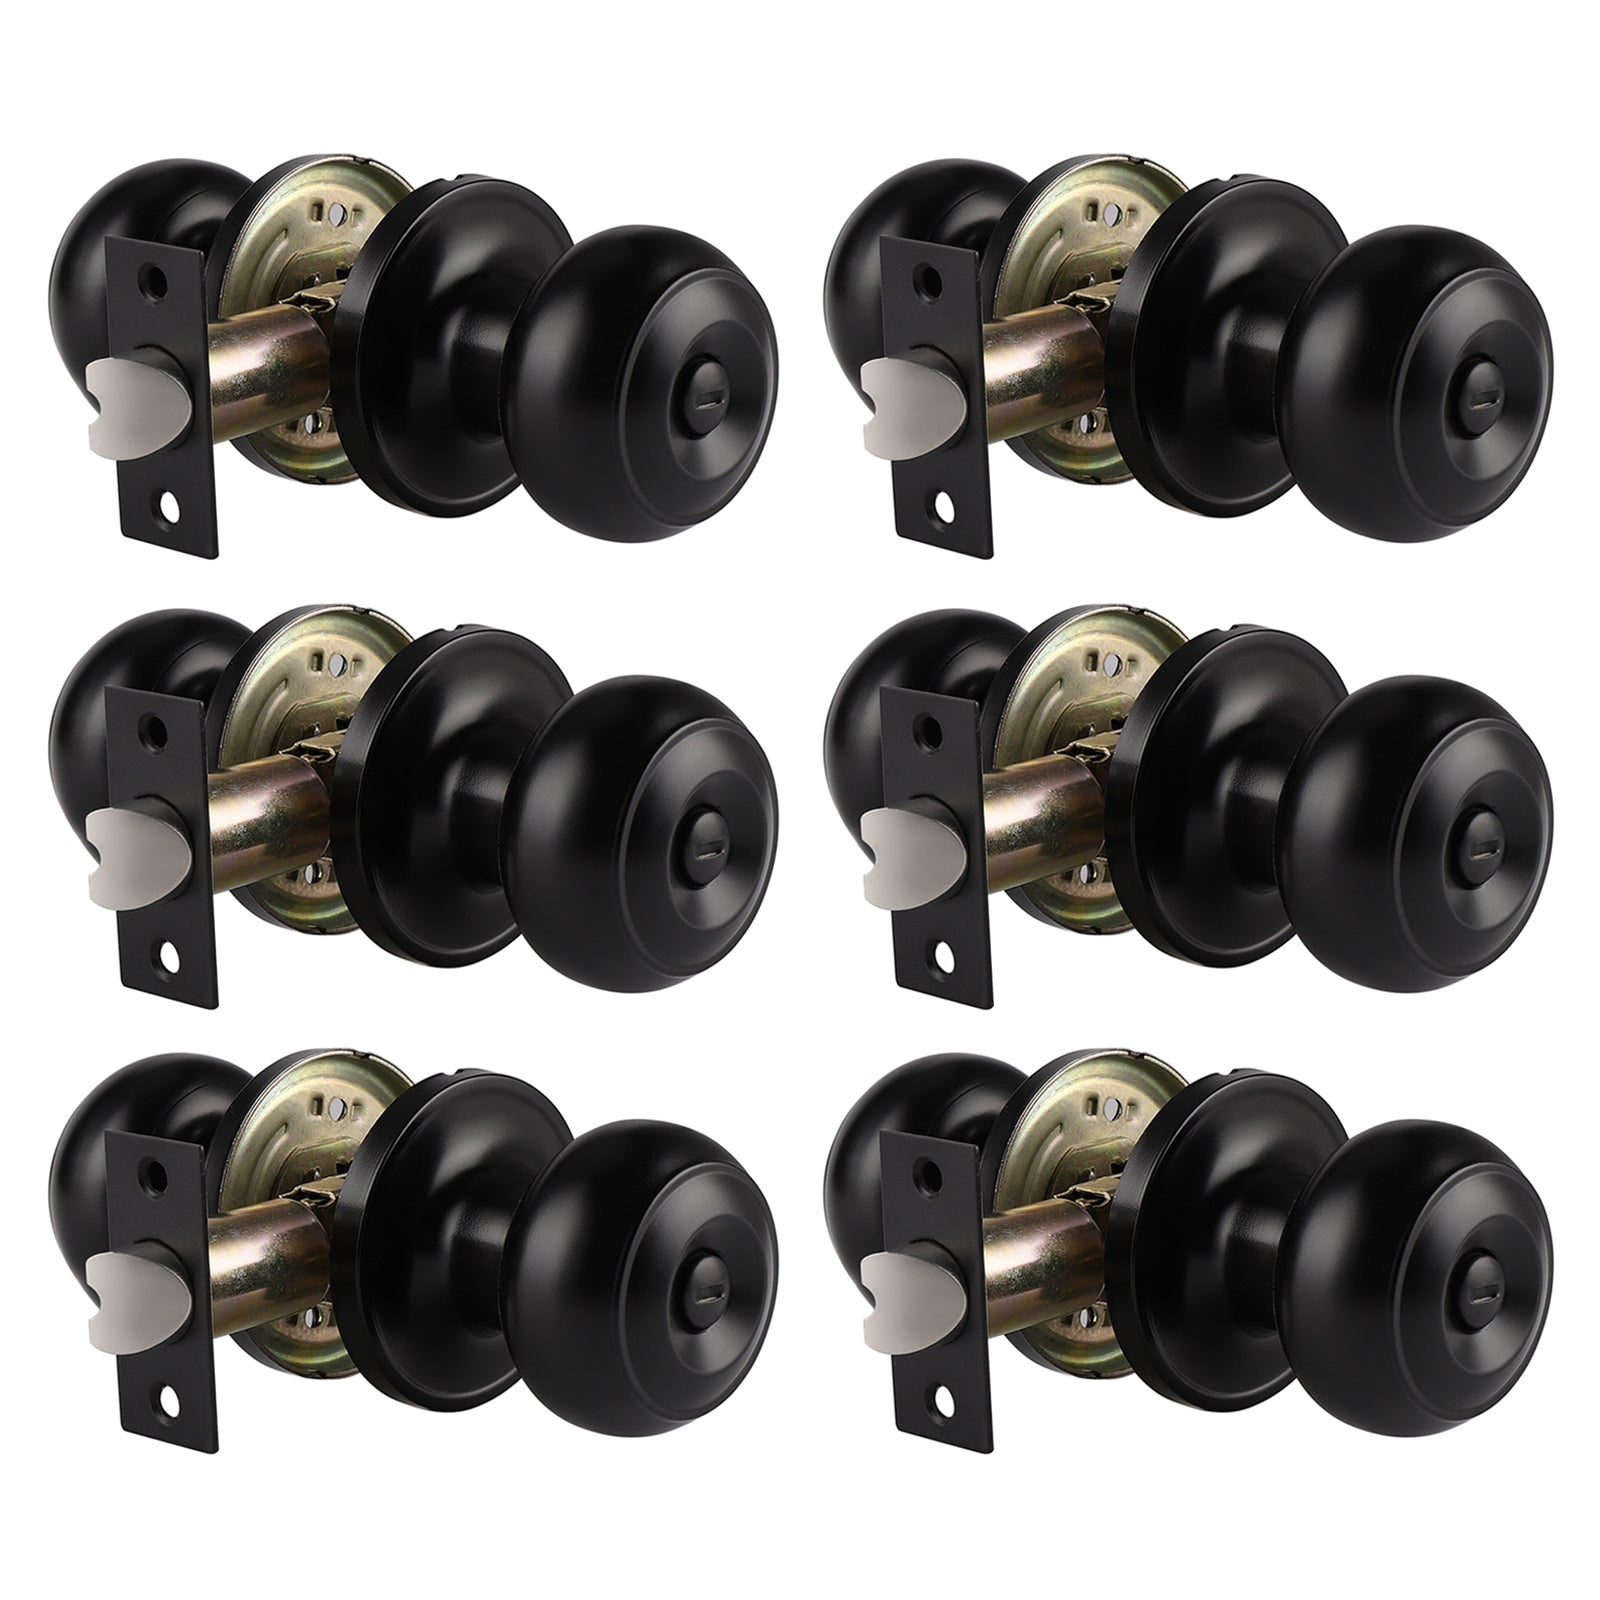 Probrico Ball Knob with Rosette Interior Privacy Door Knobs Black Finish 6 Packs